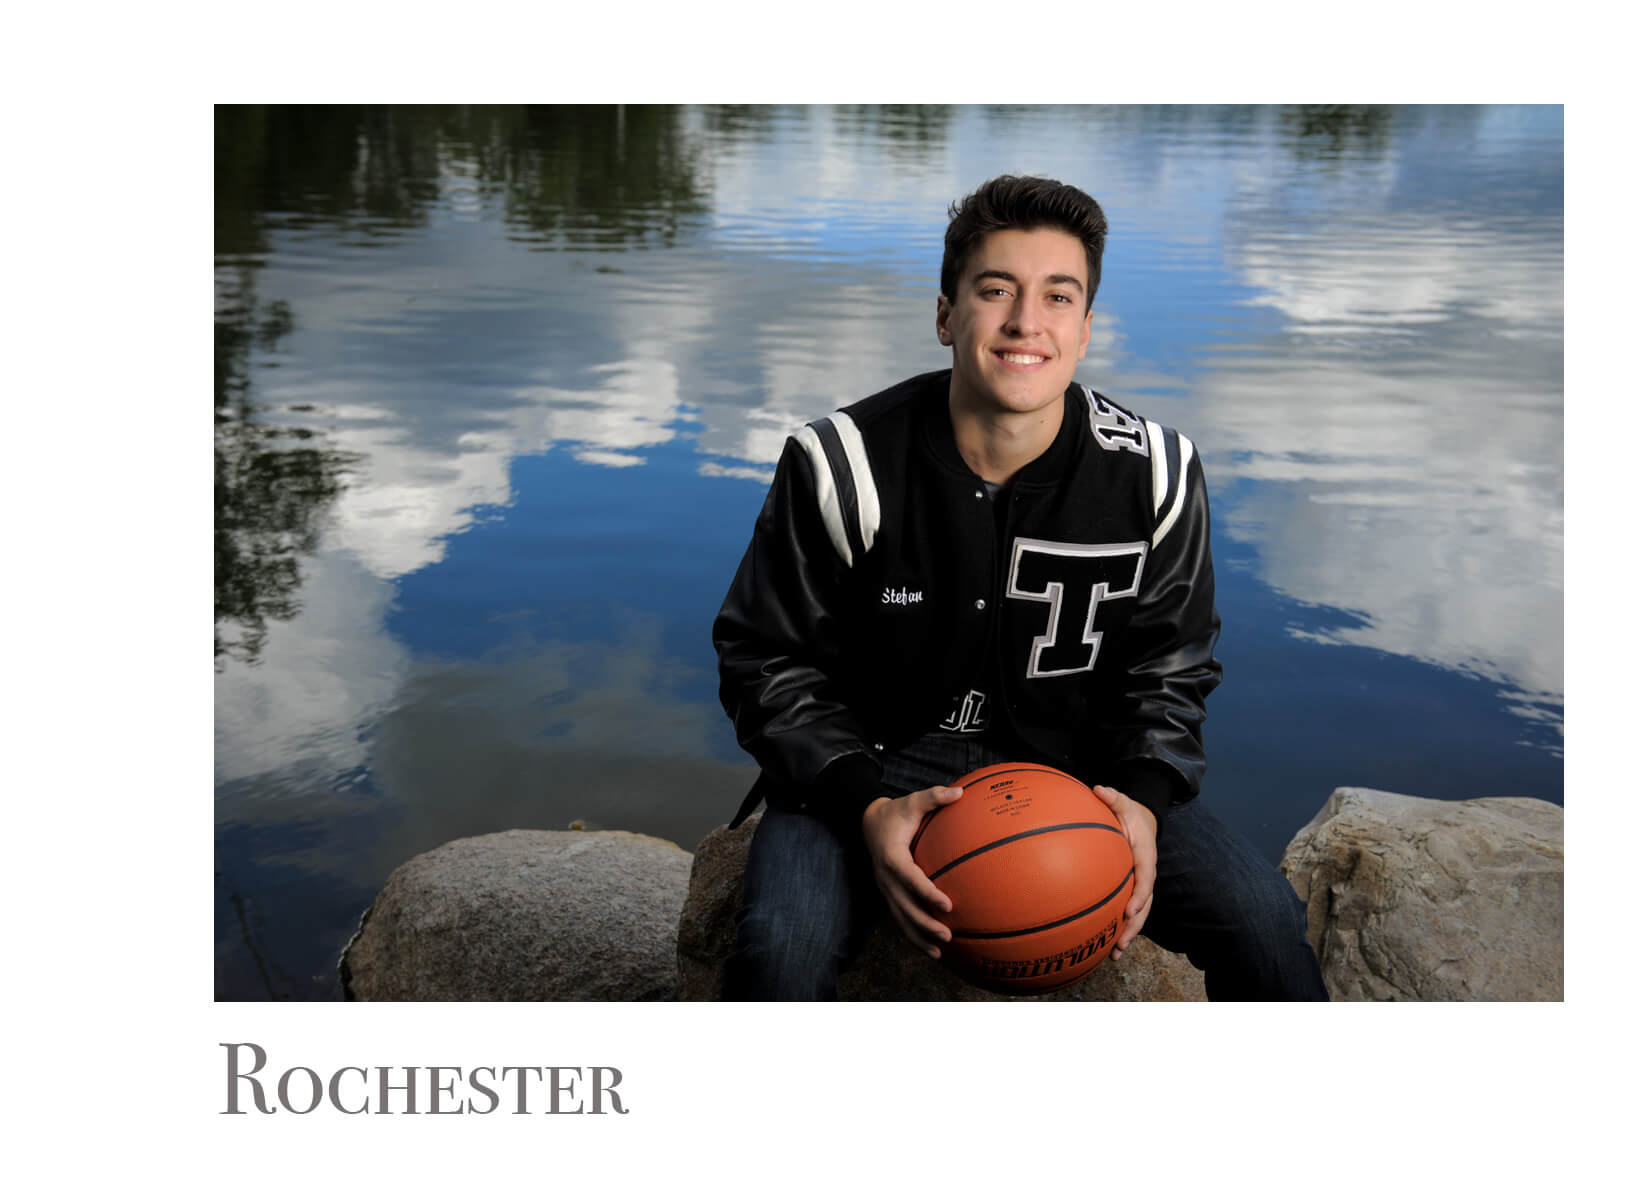 One of my favorite places to take senior photos is in the Rochester, Michigan area.